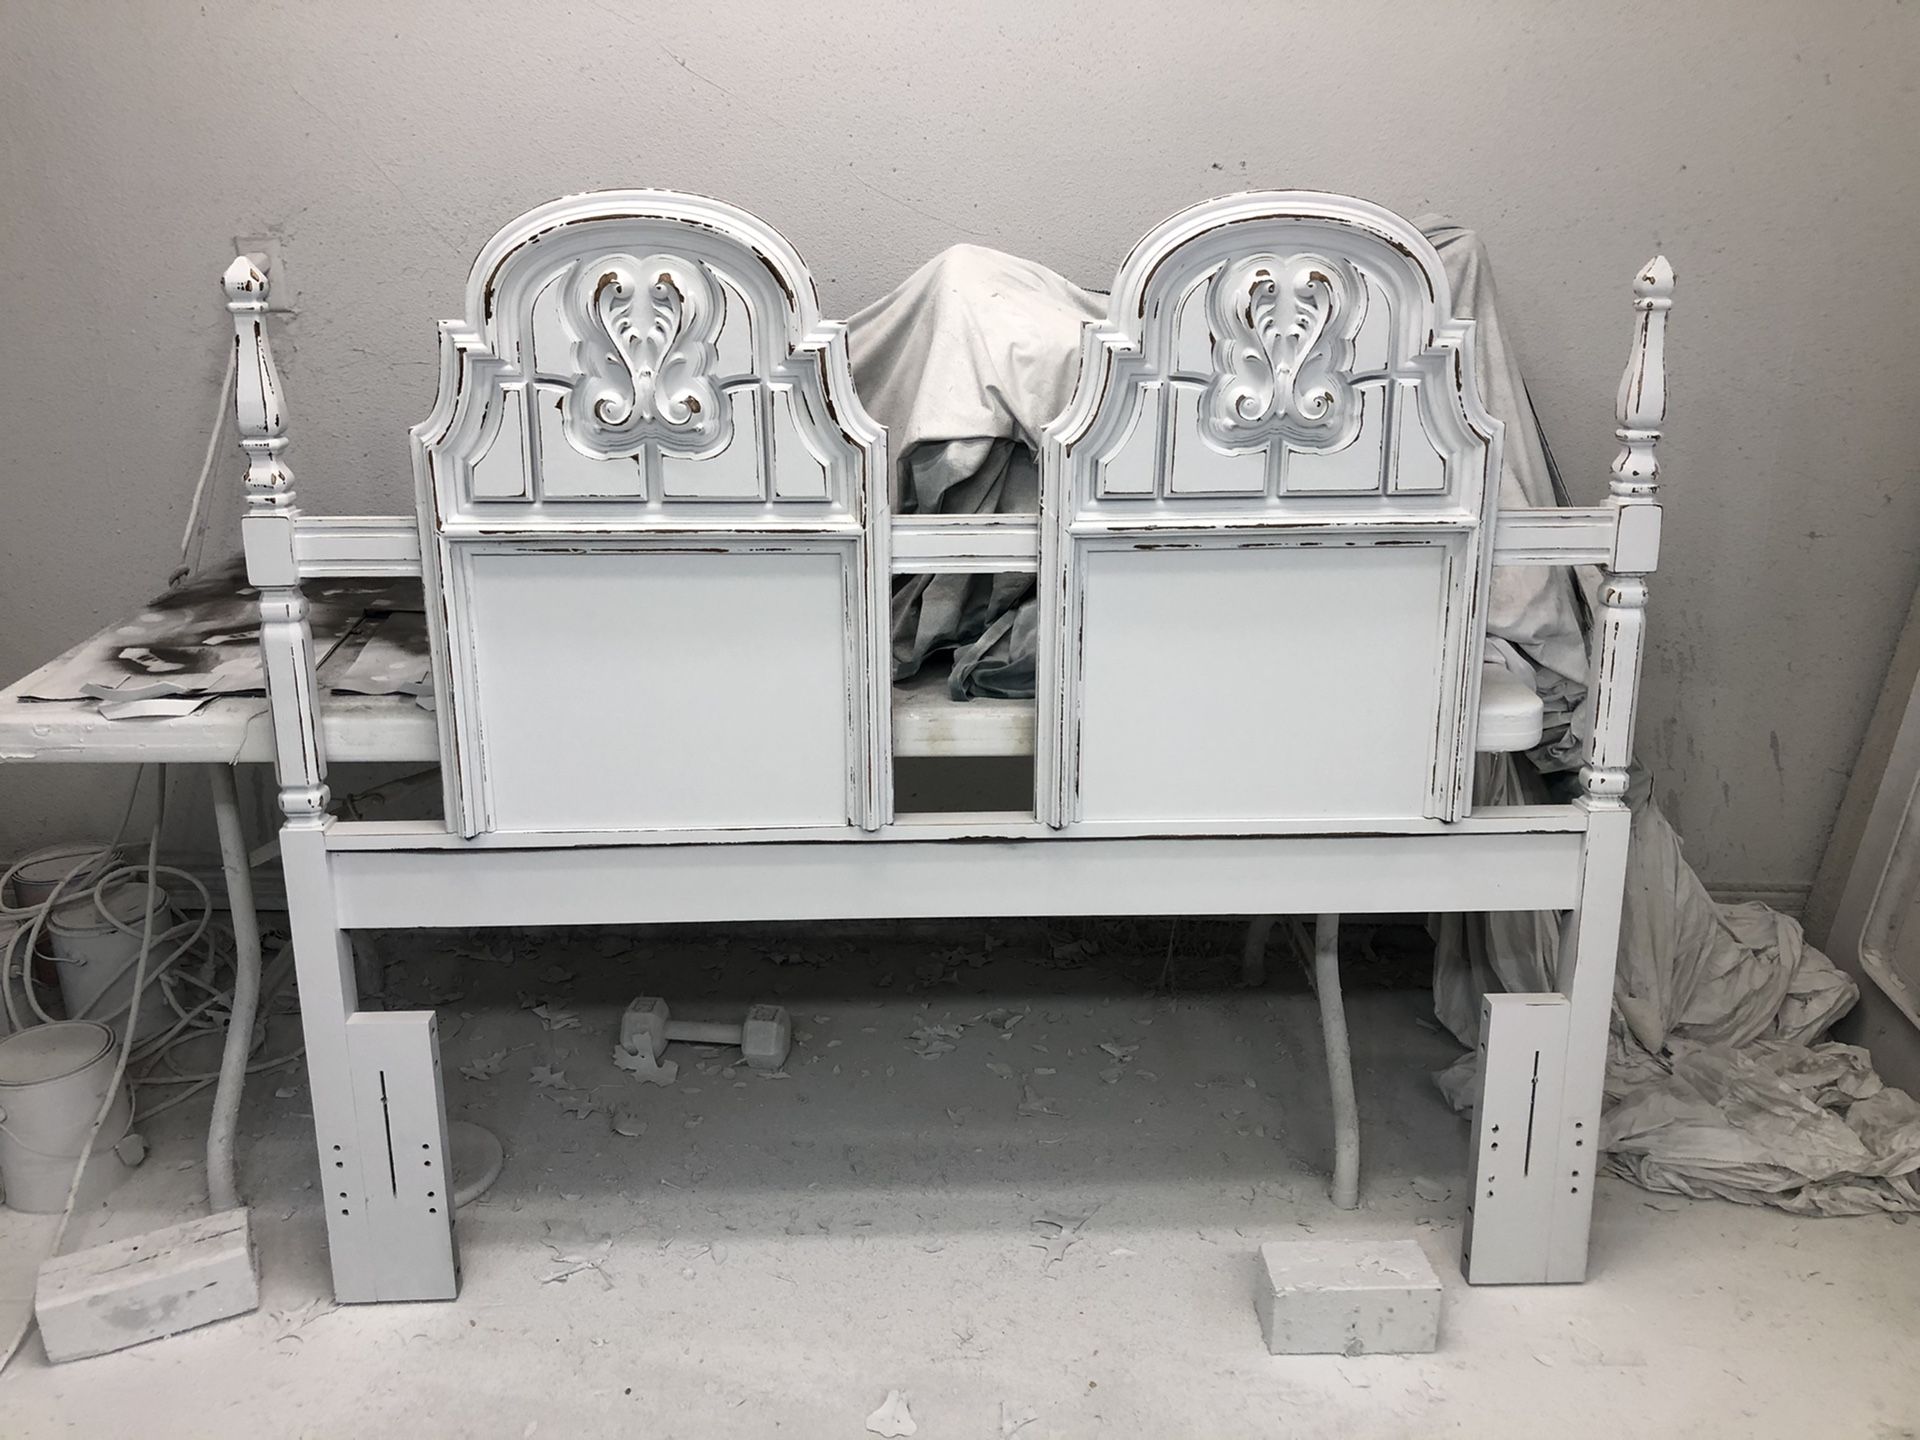 Farmhouse cottage shabby chic rustic vintage French provincial country queen full headboard and bed frame